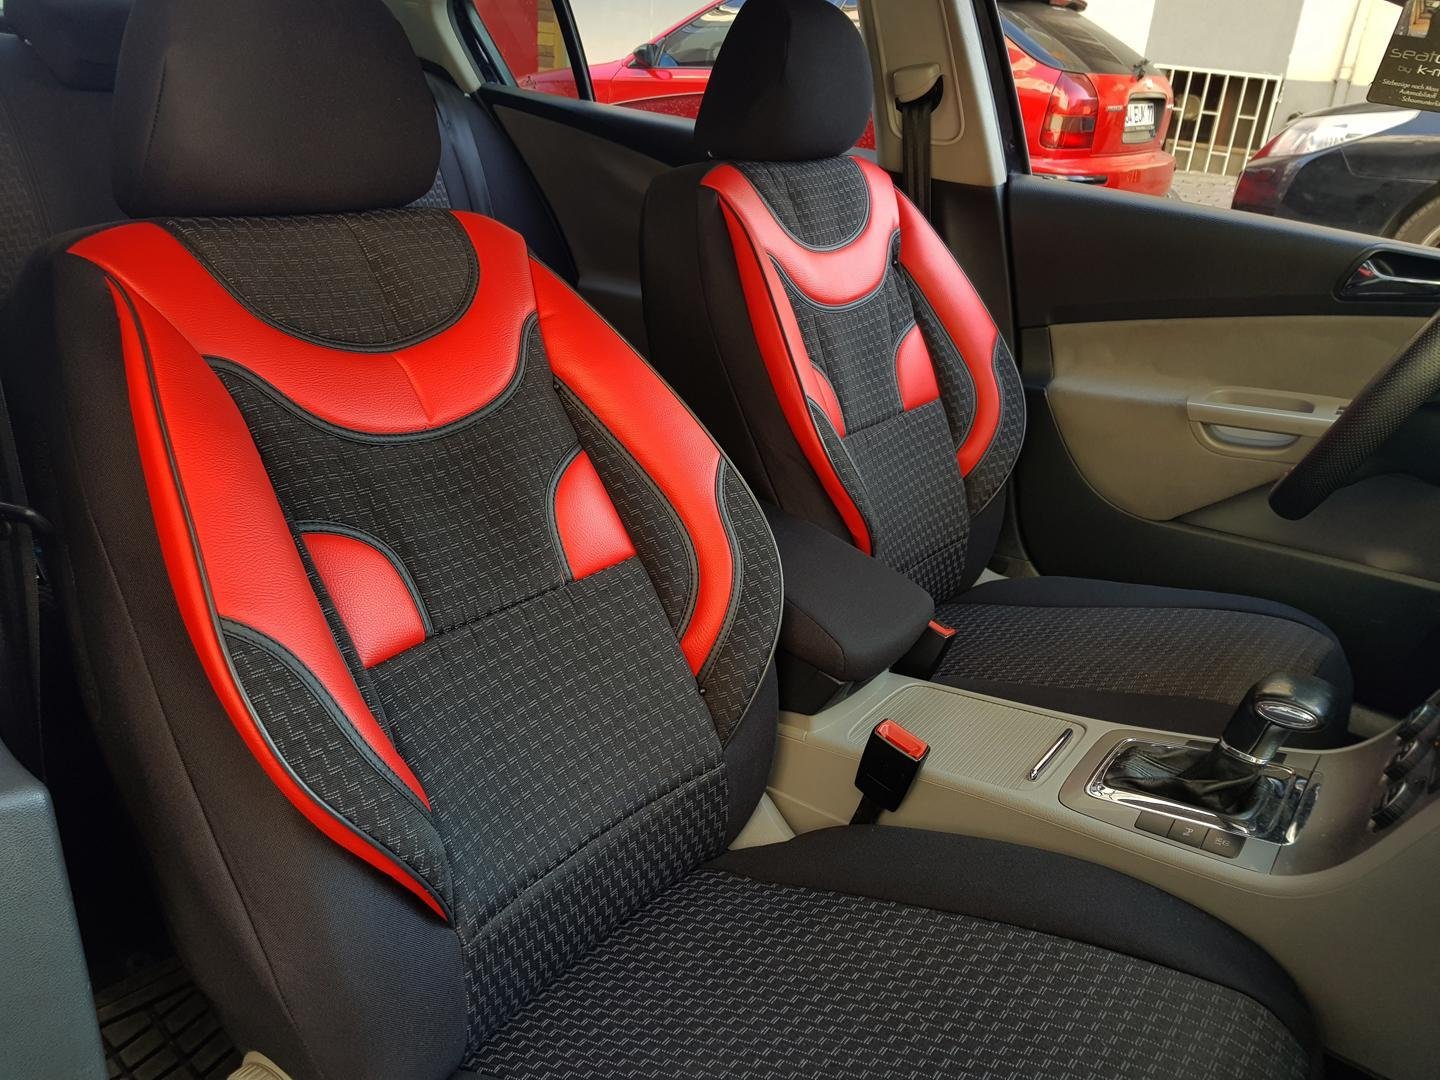 2 Red Front High Quality Car Seat Covers Protectors For Seat Toledo 